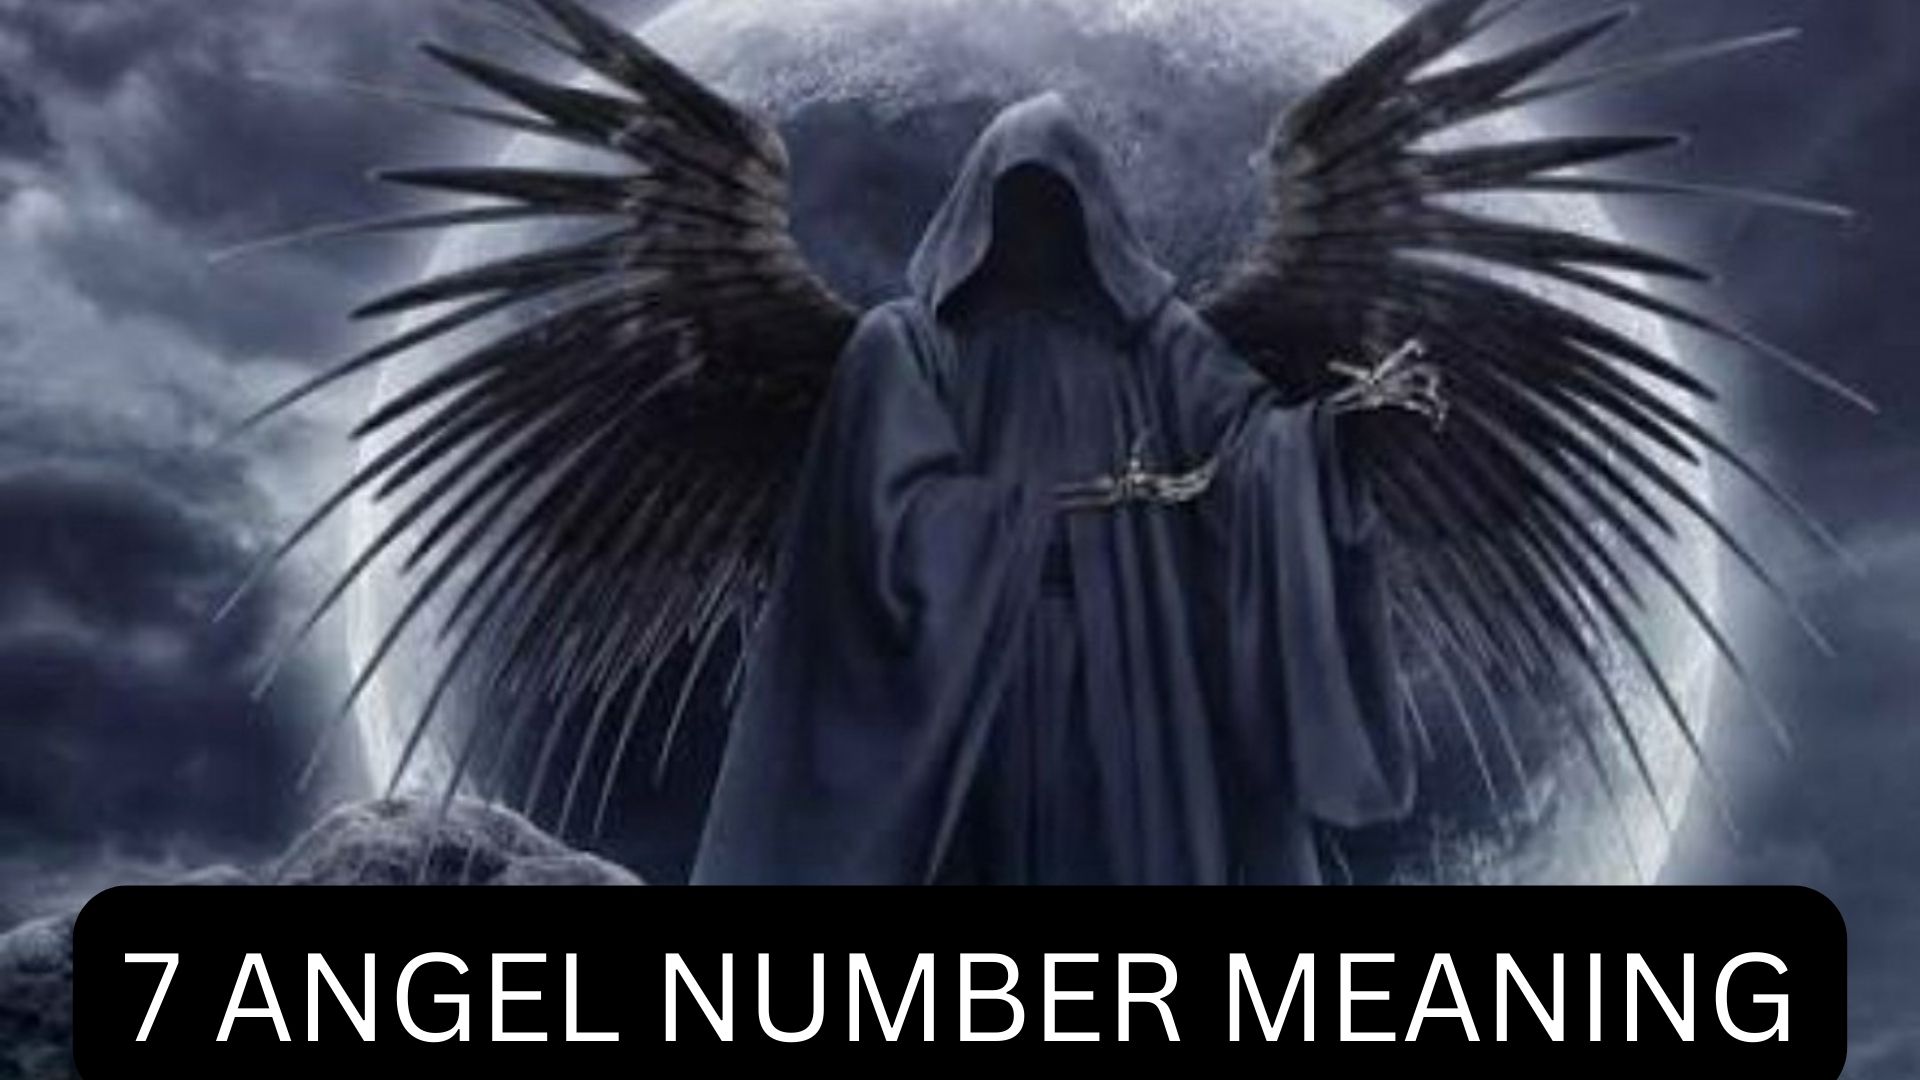 7 Angel Number Meaning - Fullness In Life